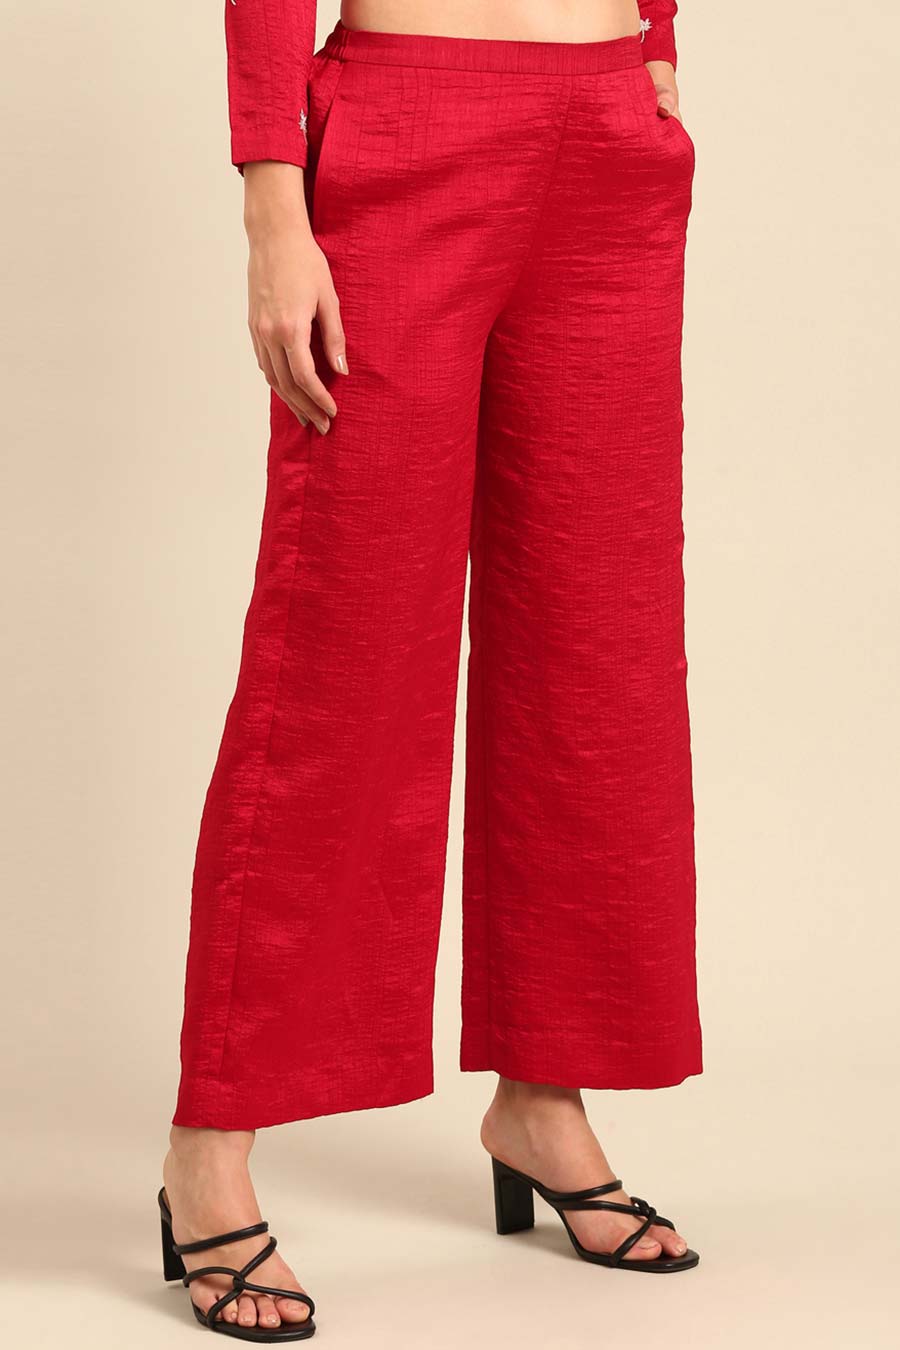 Red Flared Pants